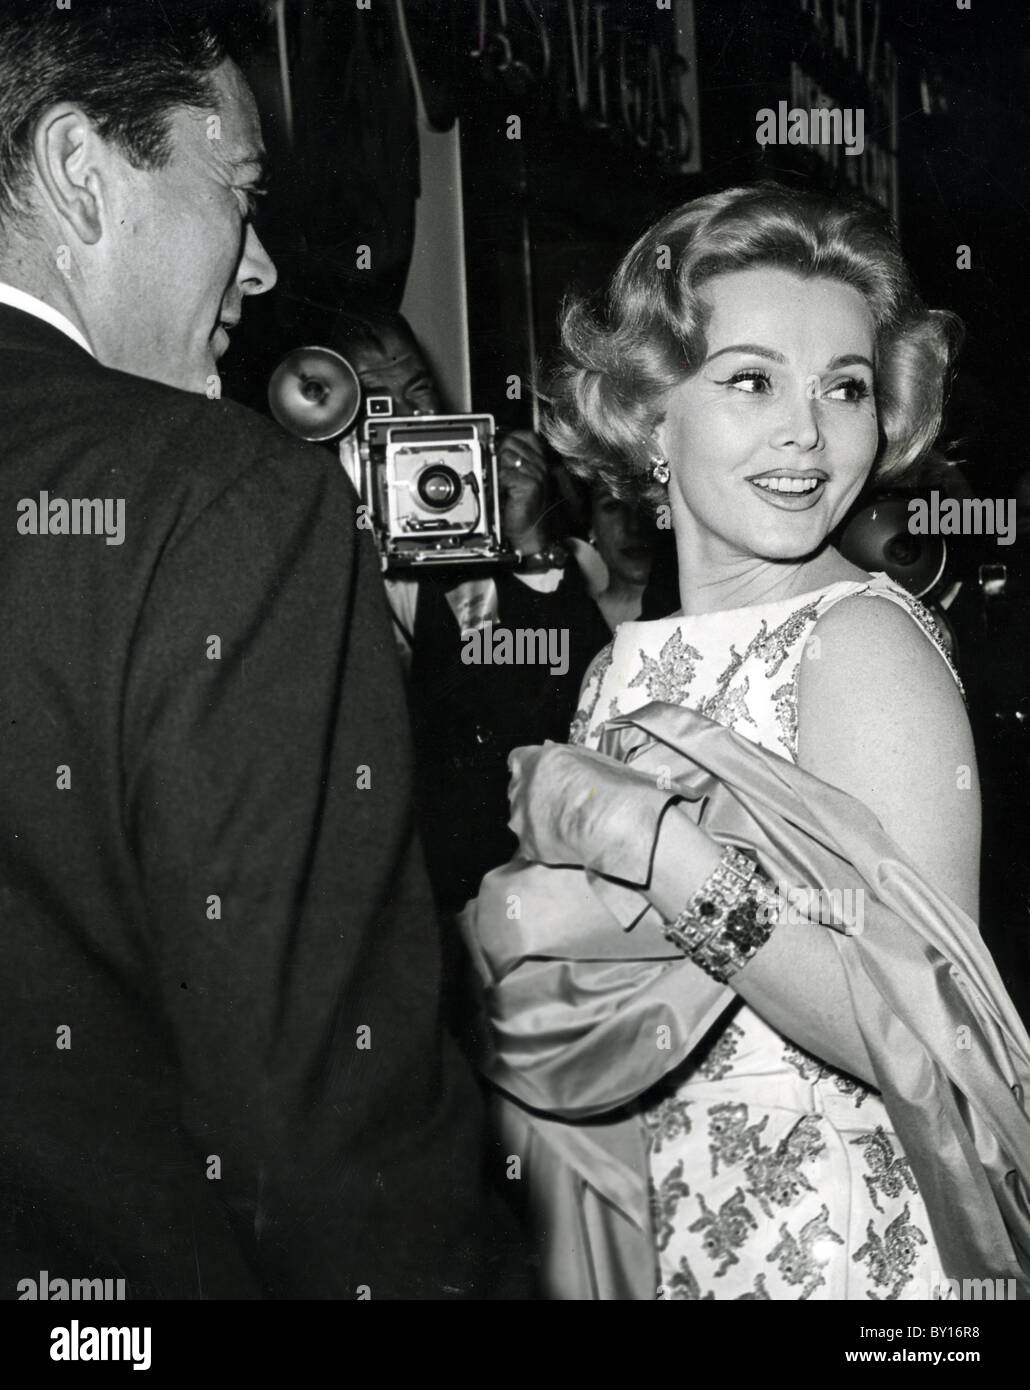 ZSA ZSA GABOR  Hungarian-American film actress with producer Pepi Lenzi about 1959 Stock Photo